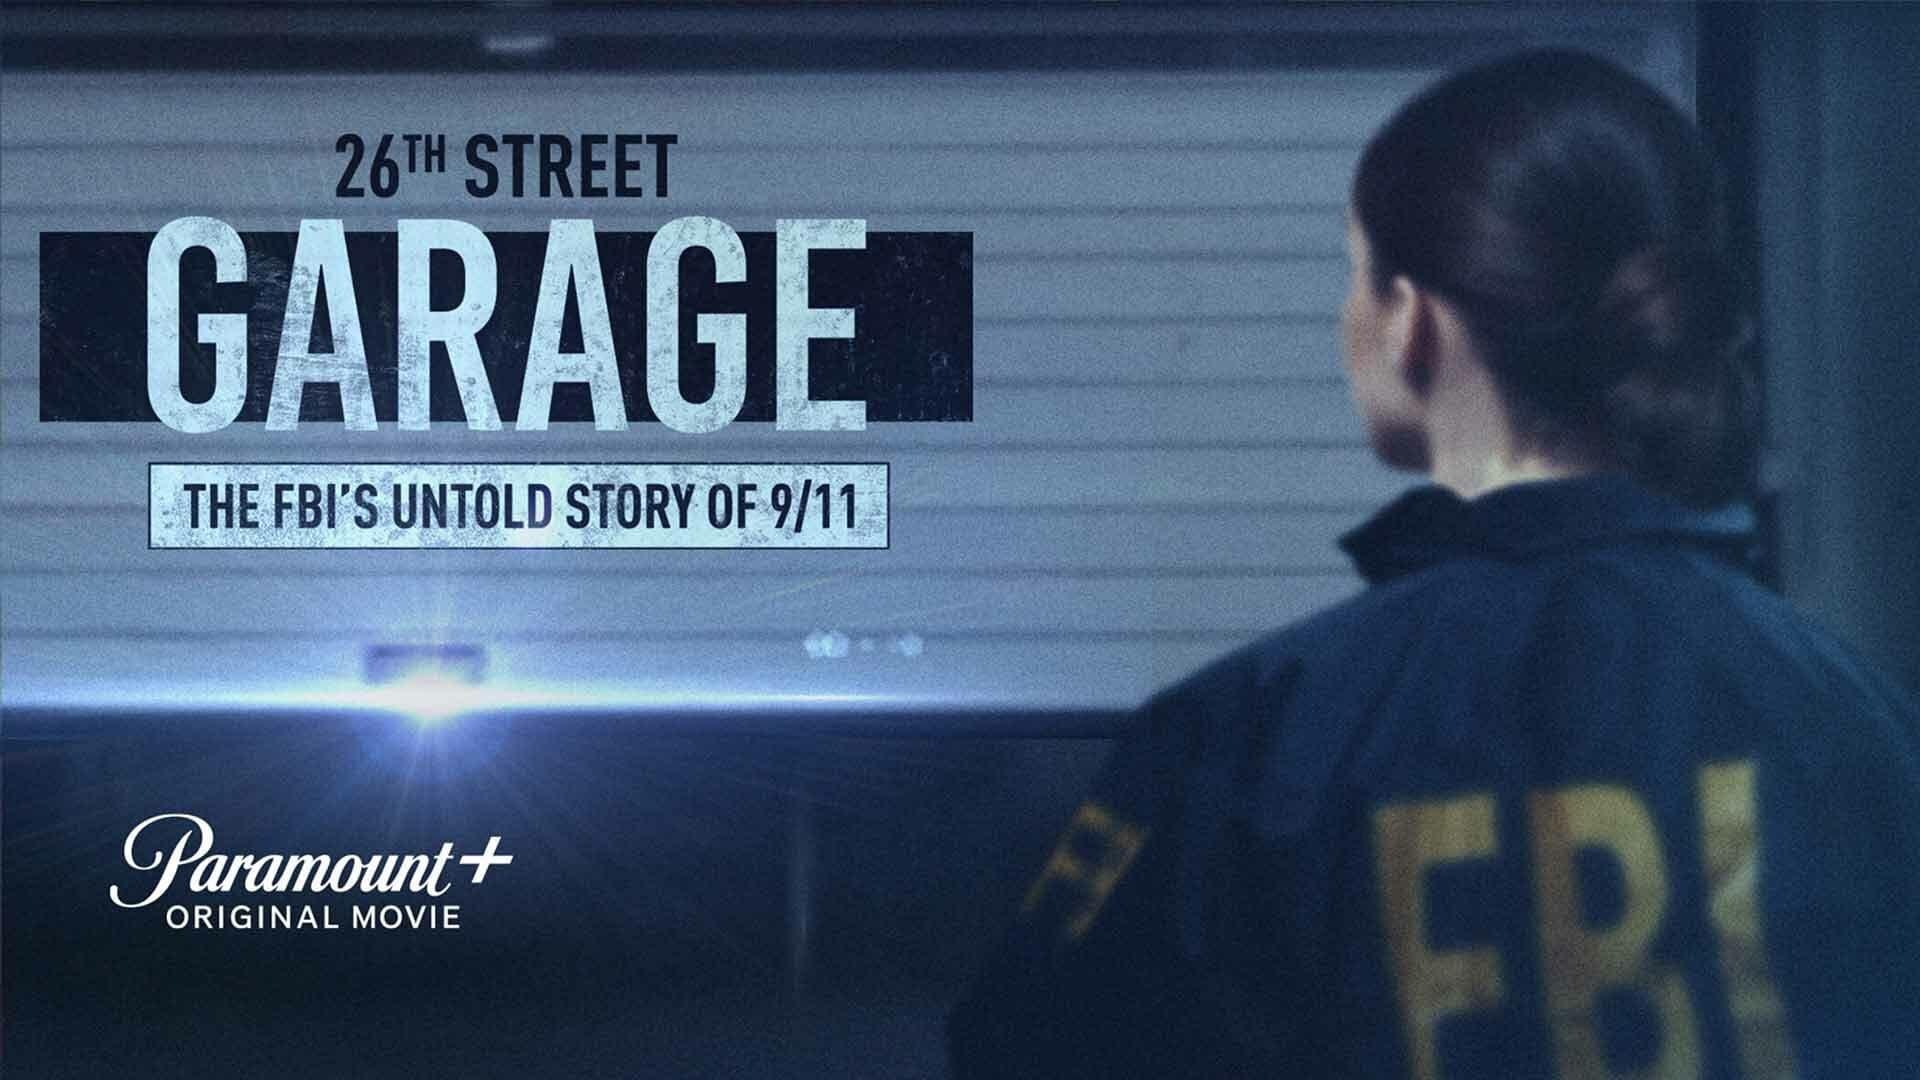 The 26th Street Garage: The FBI's Untold Story of 9/11 backdrop